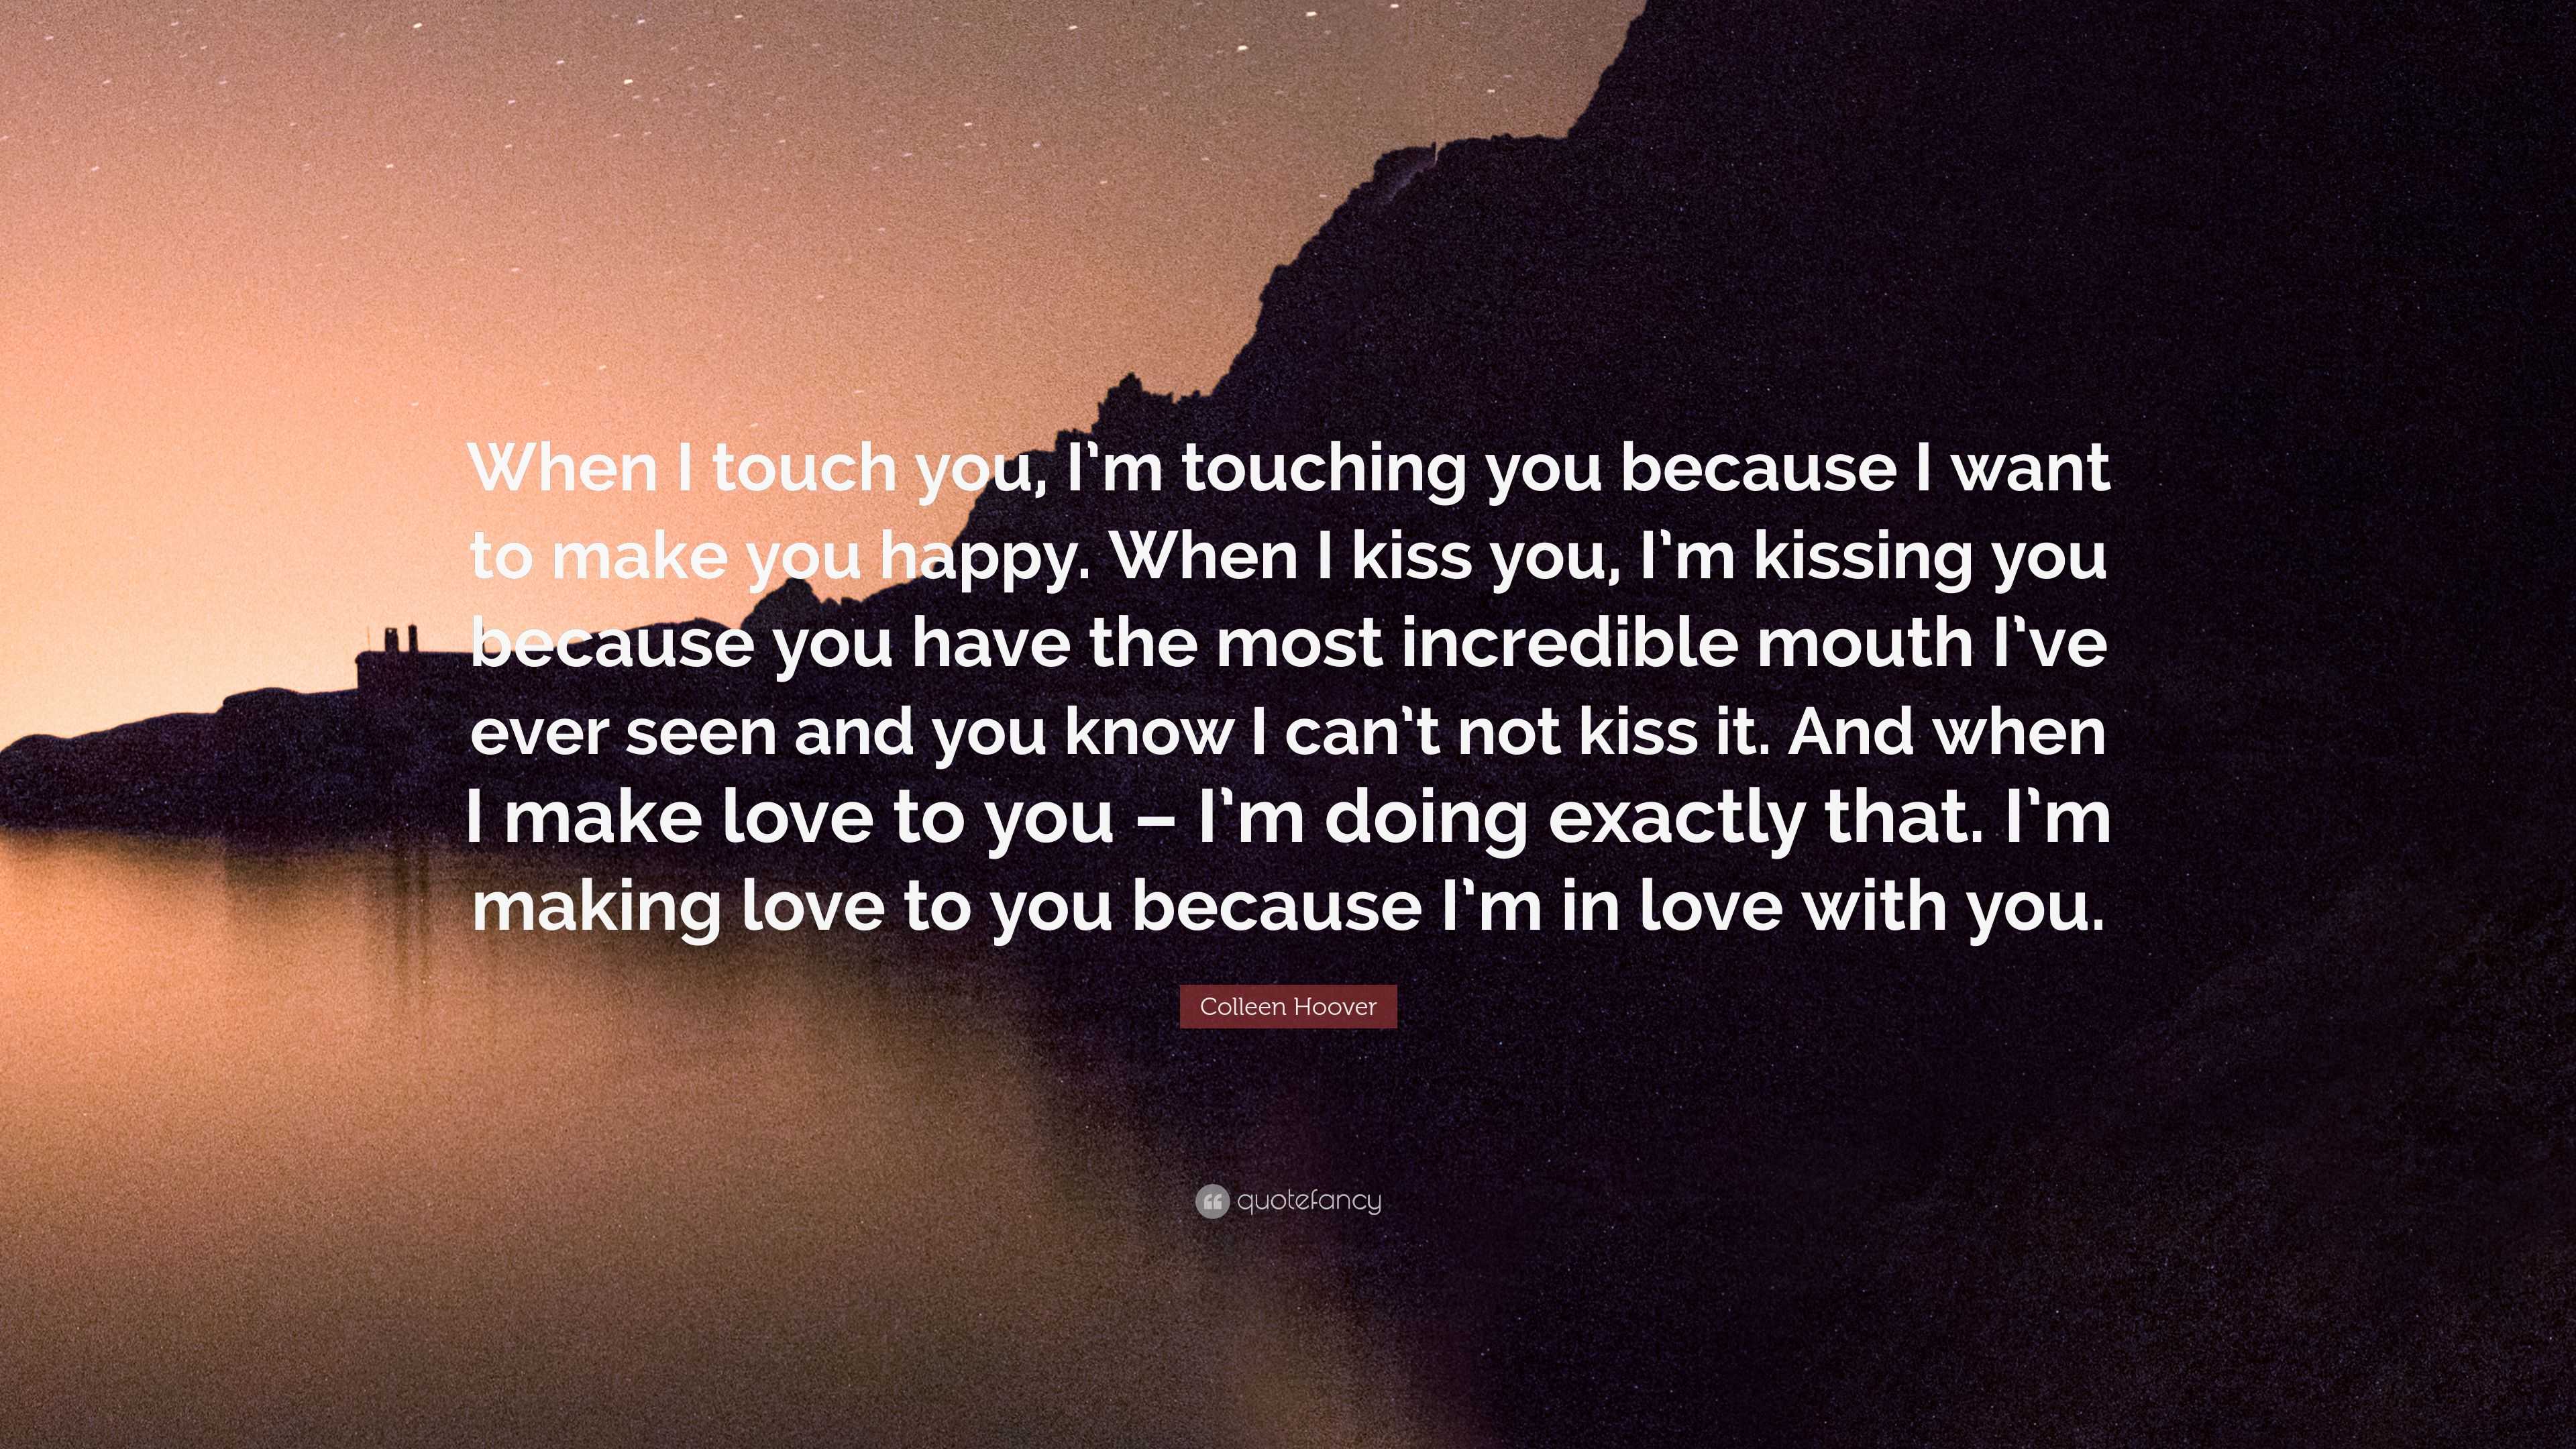 I Was Made To Love Magic Colleen Hoover Quote: “When I touch you, I’m touching you because I